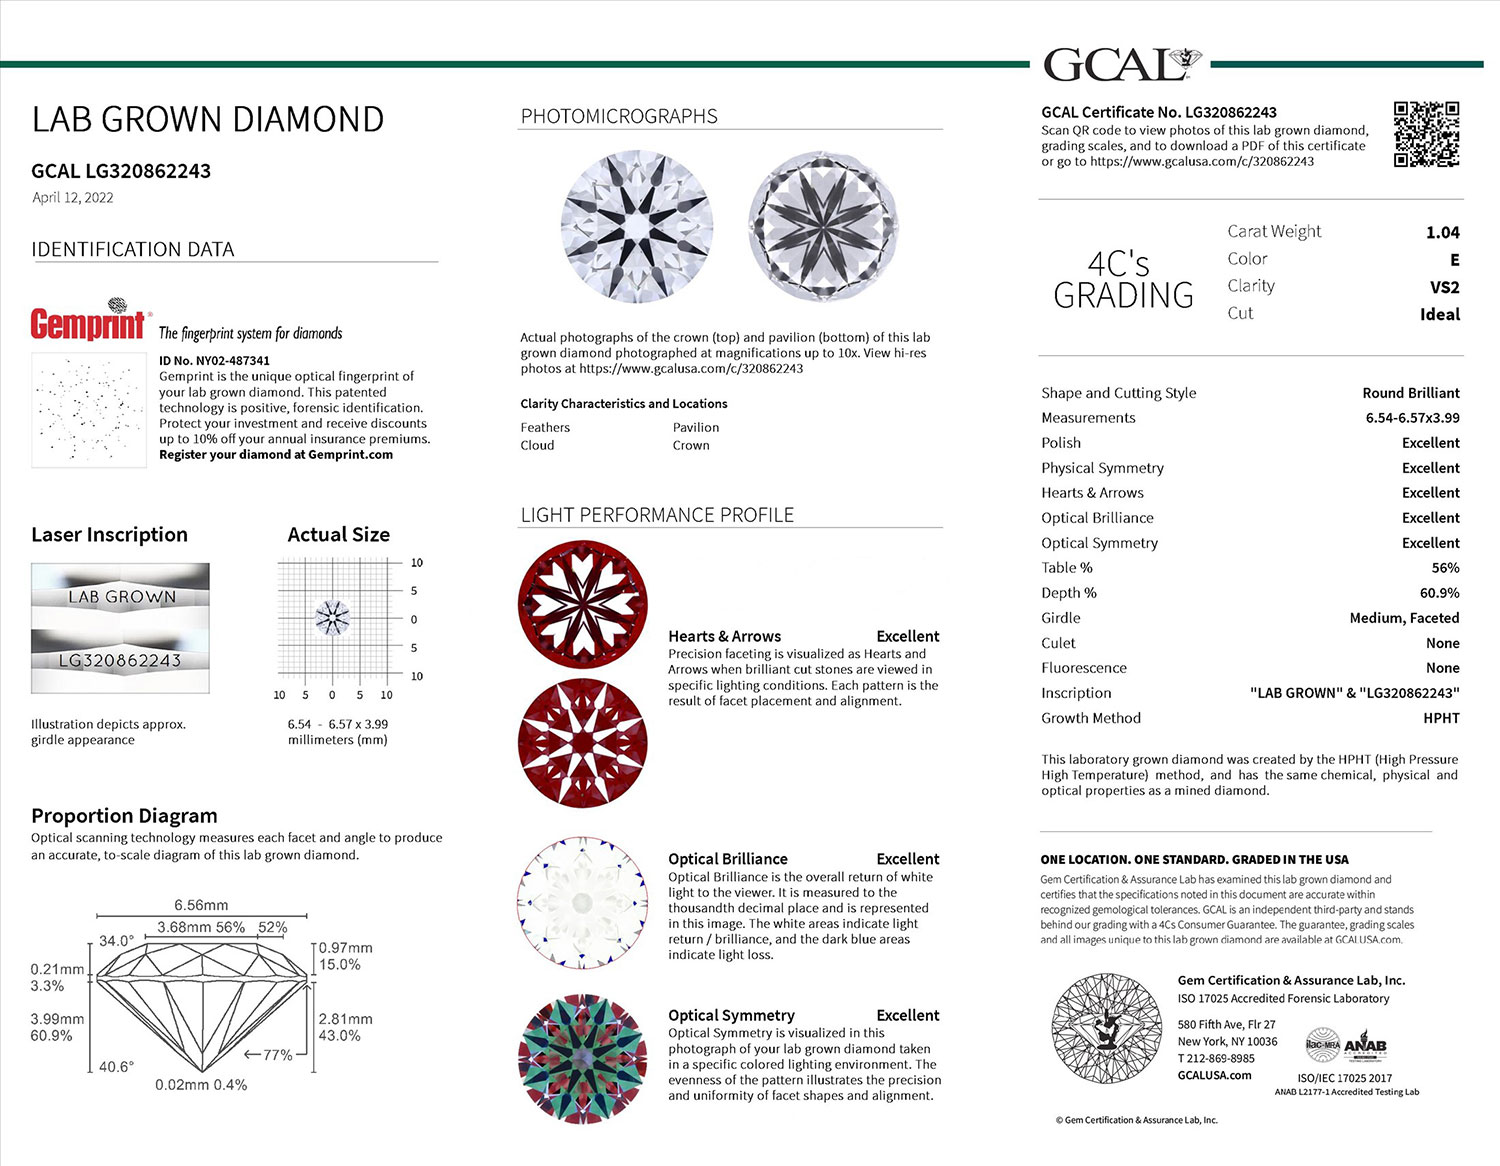 Lab Grown Diamond Guaranteed Certificate With H&A